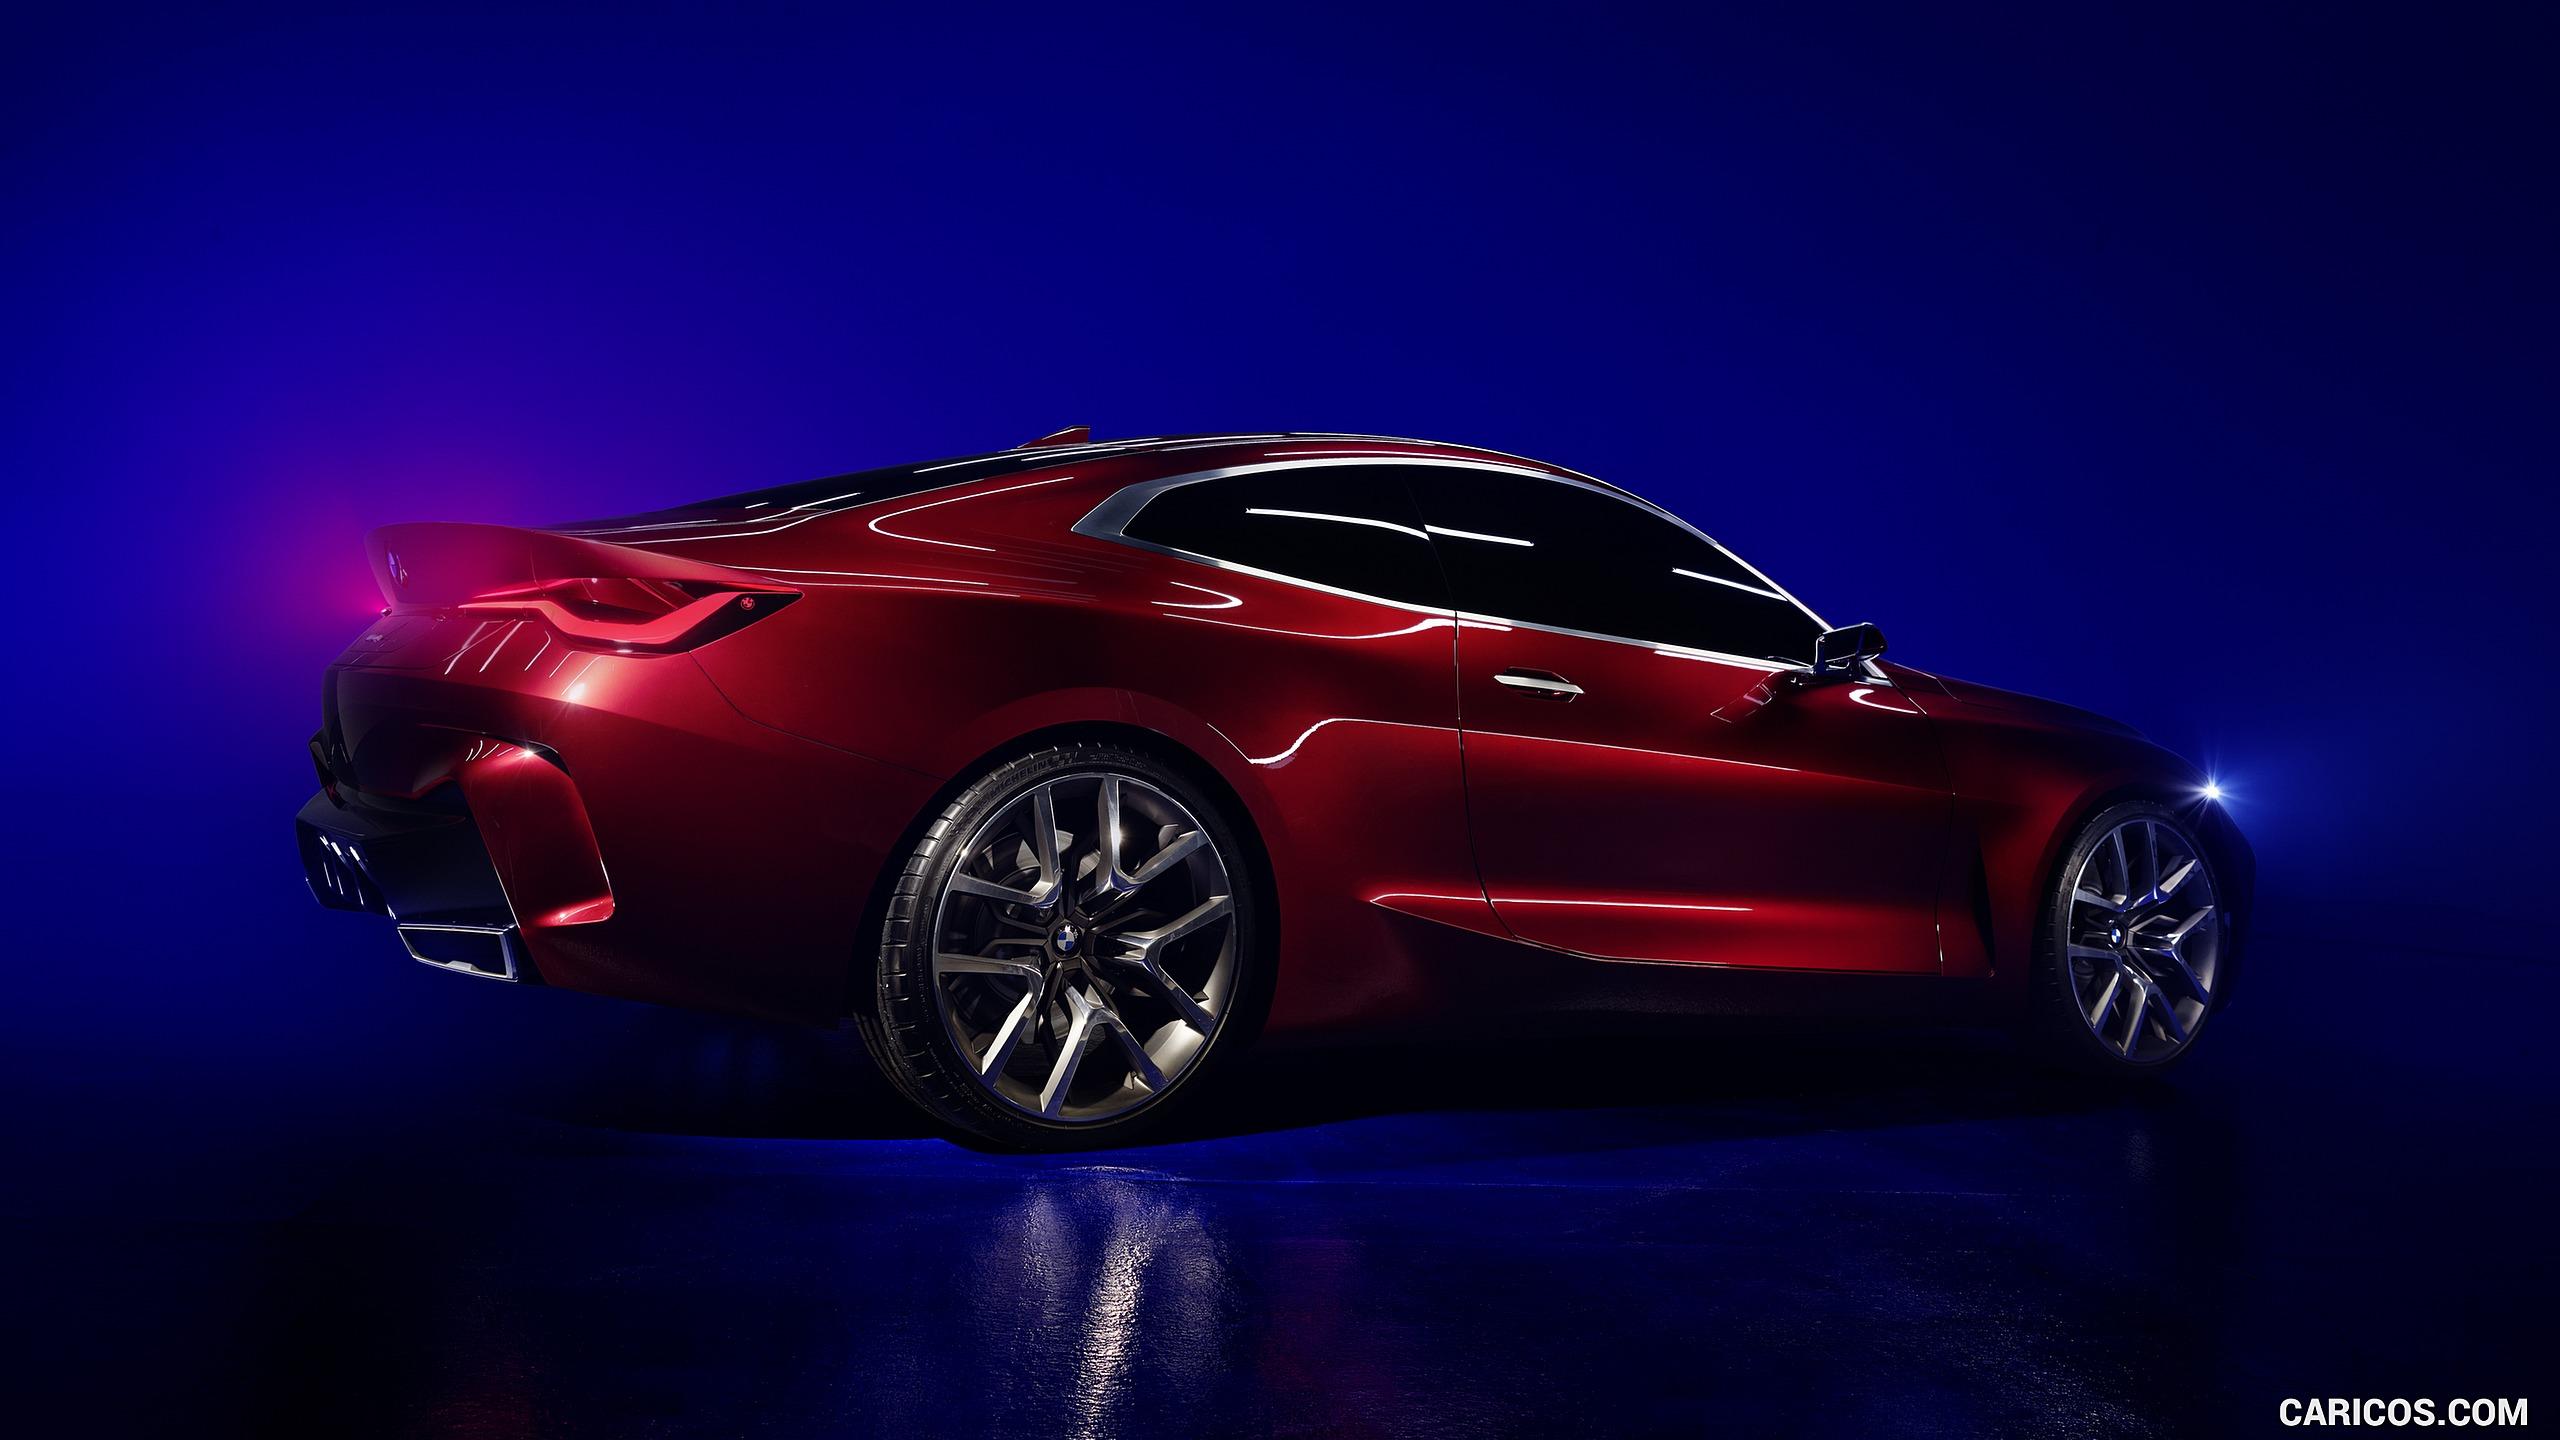 Bmw Concept 4 Series Coupe Wallpapers